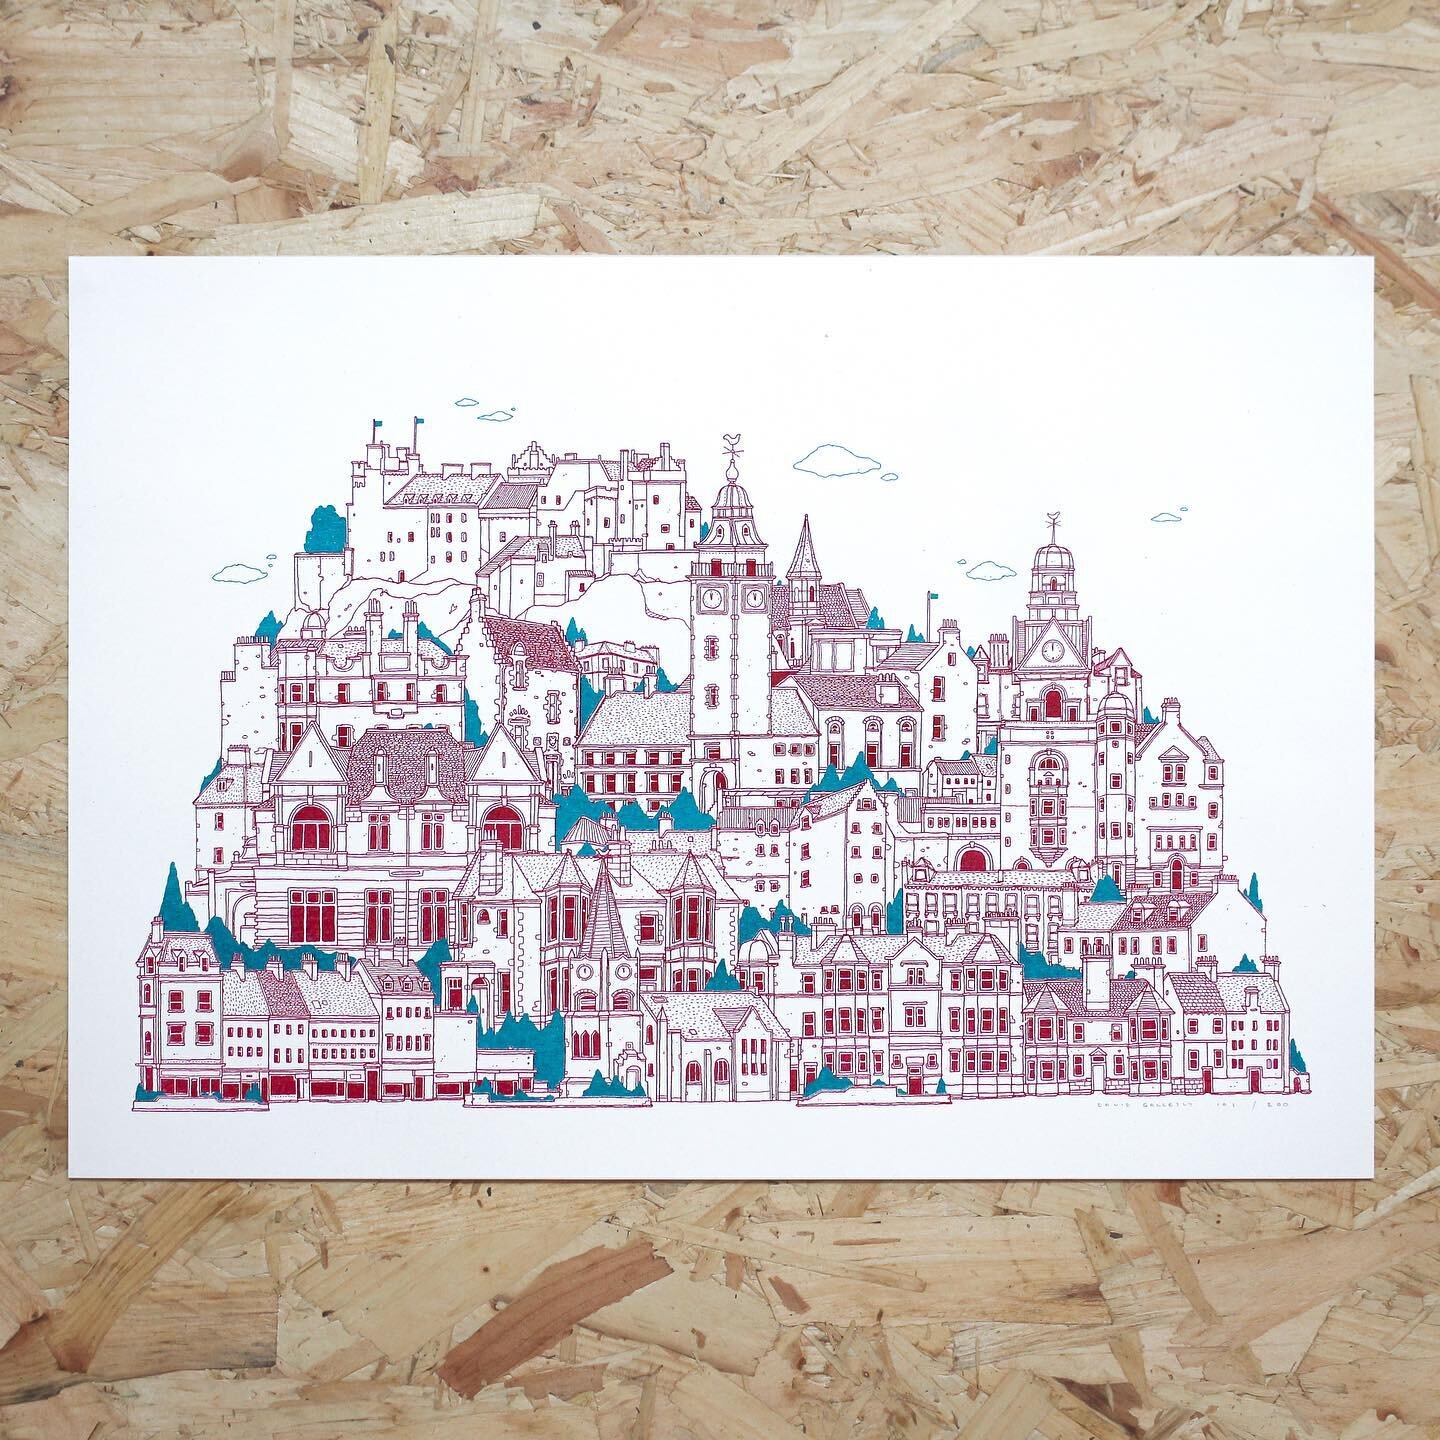 Stirling Cityscape. A3 Risograph print now available from davidgalletly.com (or in person at @madeinstirlingstore). #stirling